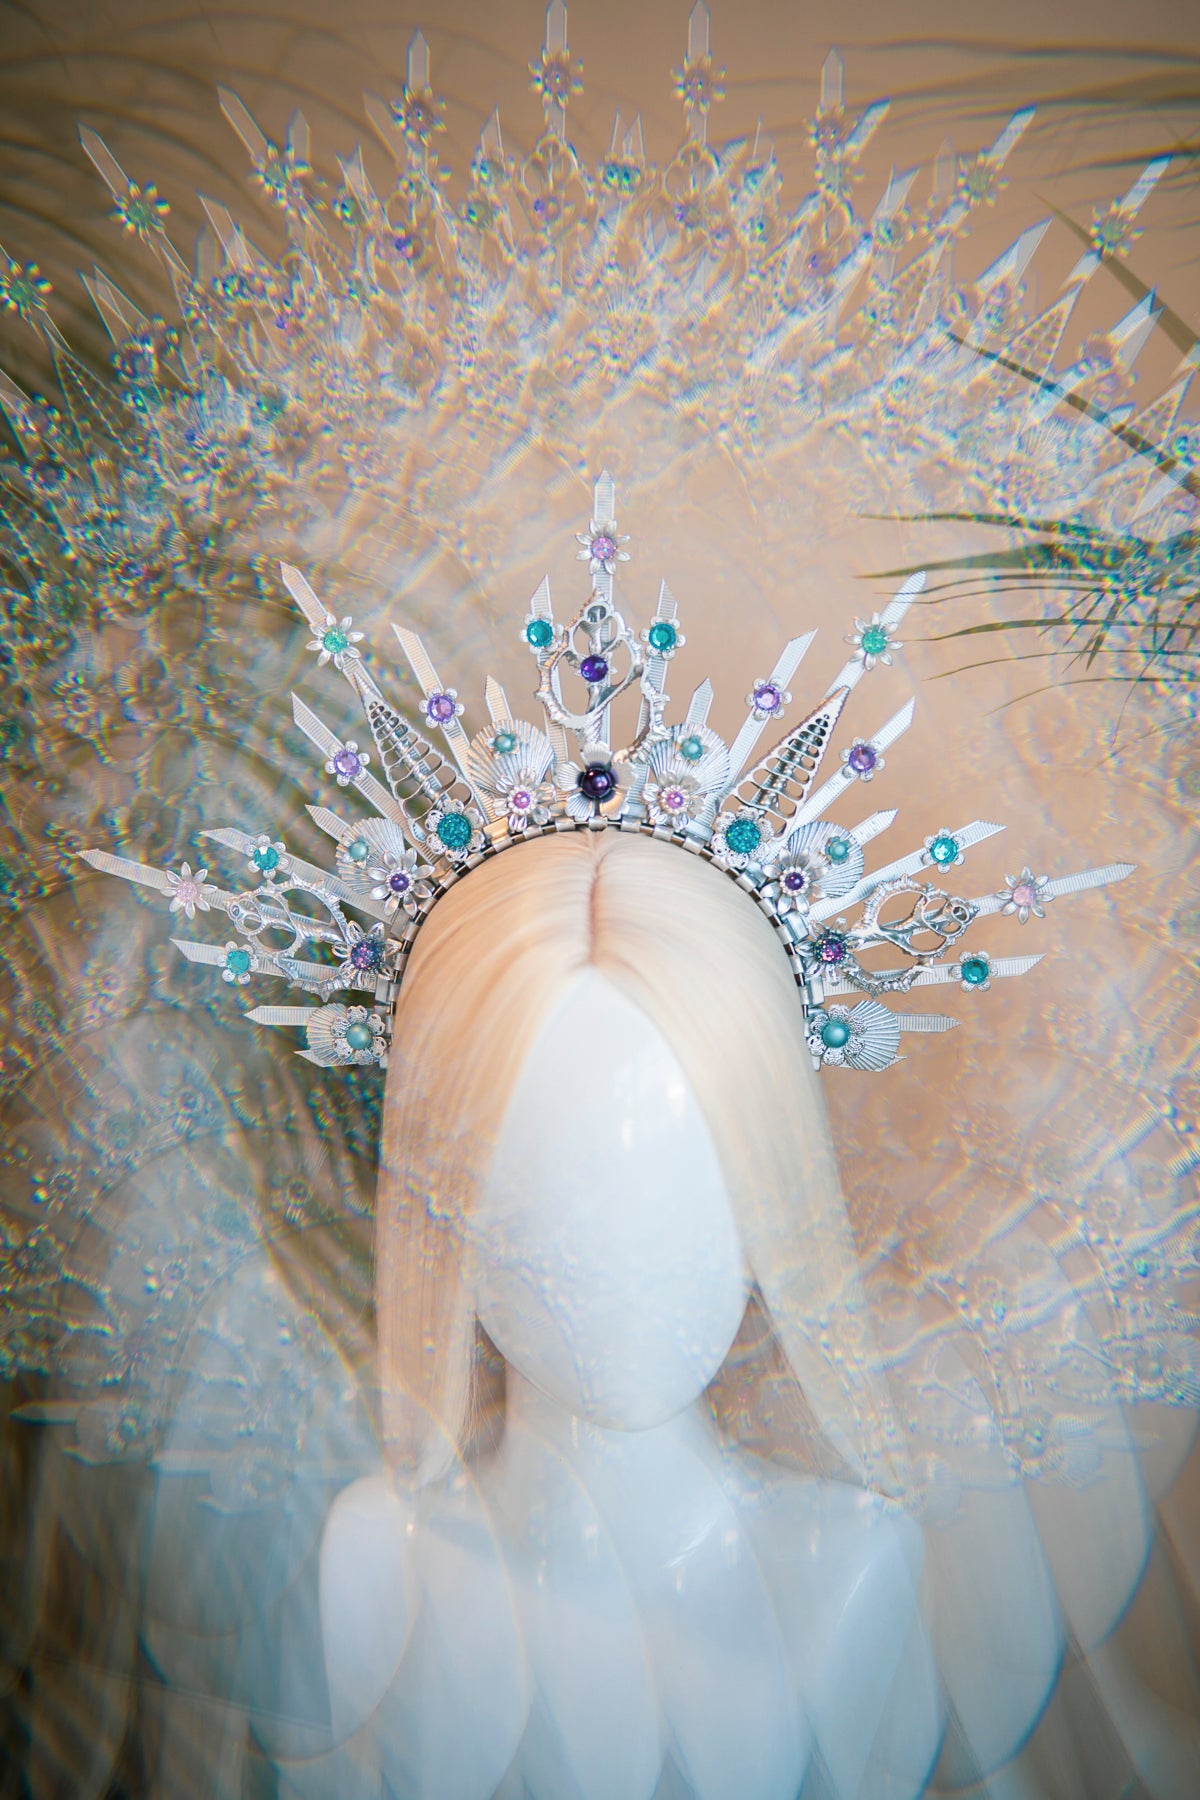 Load image into Gallery viewer, Silver Mermaid Halo Crown
